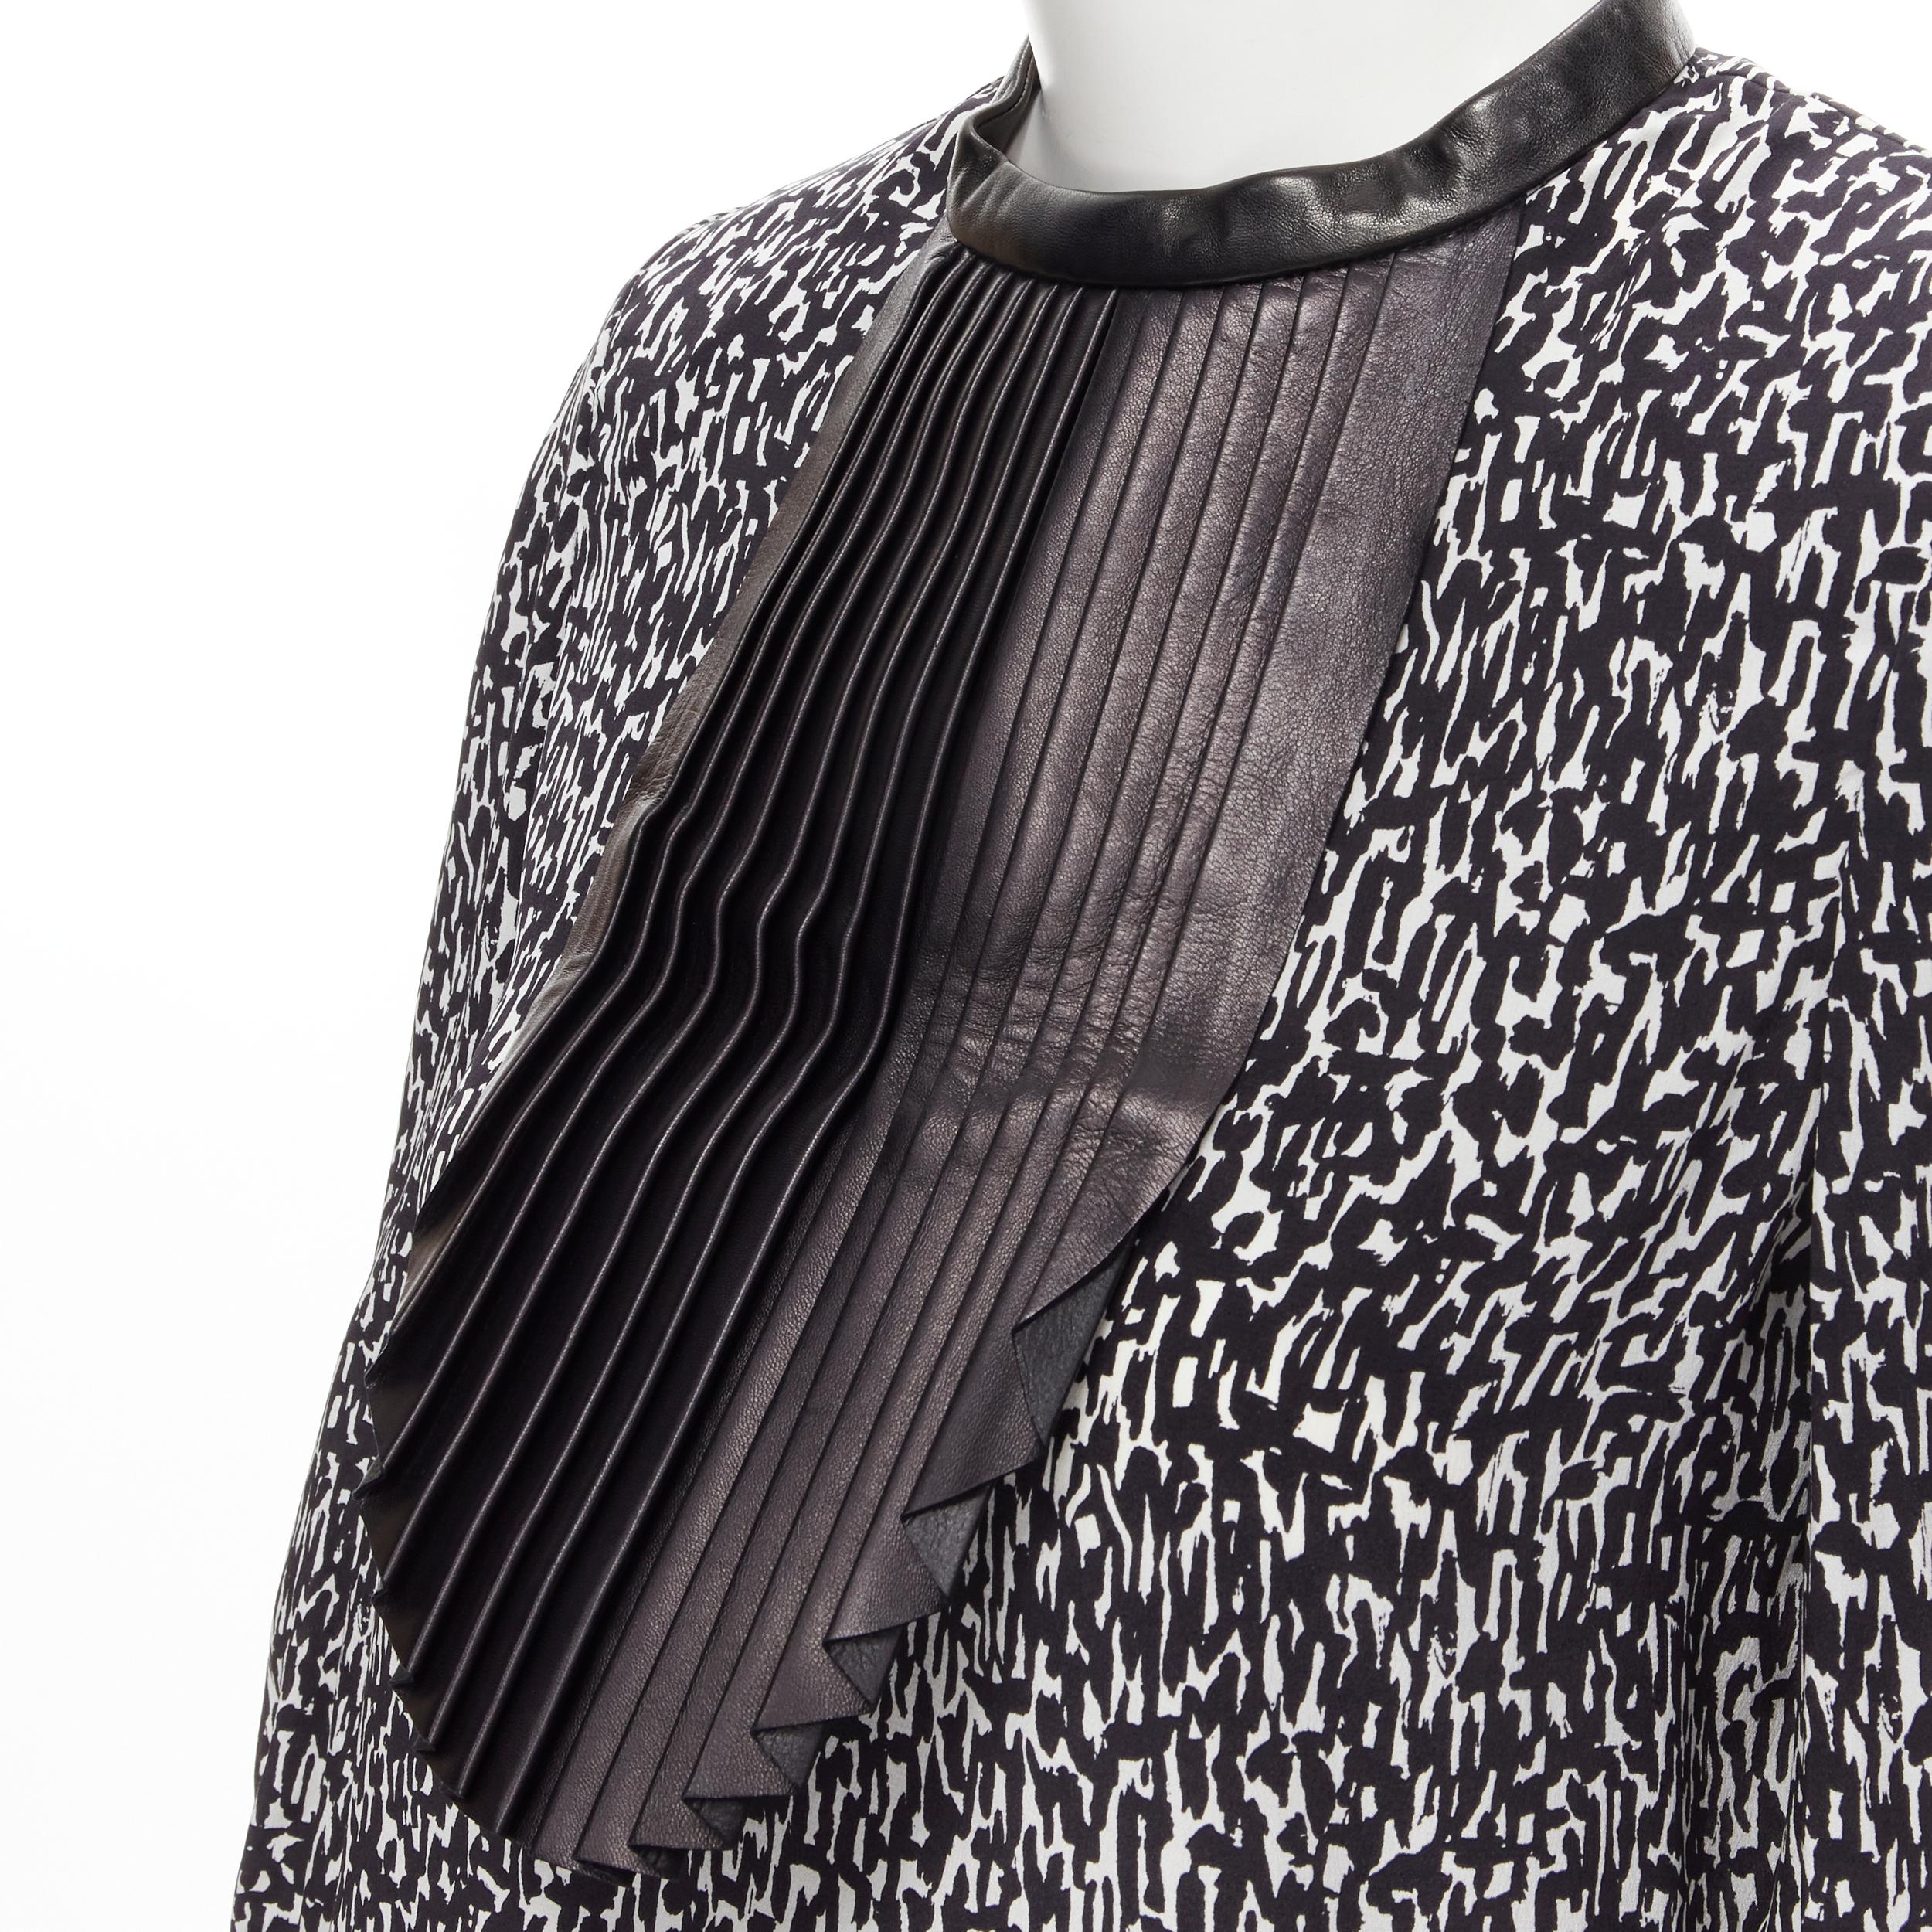 SAINT LAURENT Hedi Slimane 2012 black pleated leather bib white print silk blouse FR38 S 
Reference: MELK/A00140 
Brand: Saint Laurent 
Designer: Hedi Slimane 
Collection: 2012 
Material: Silk 
Color: Black 
Pattern: Abstract 
Closure: Button 
Extra